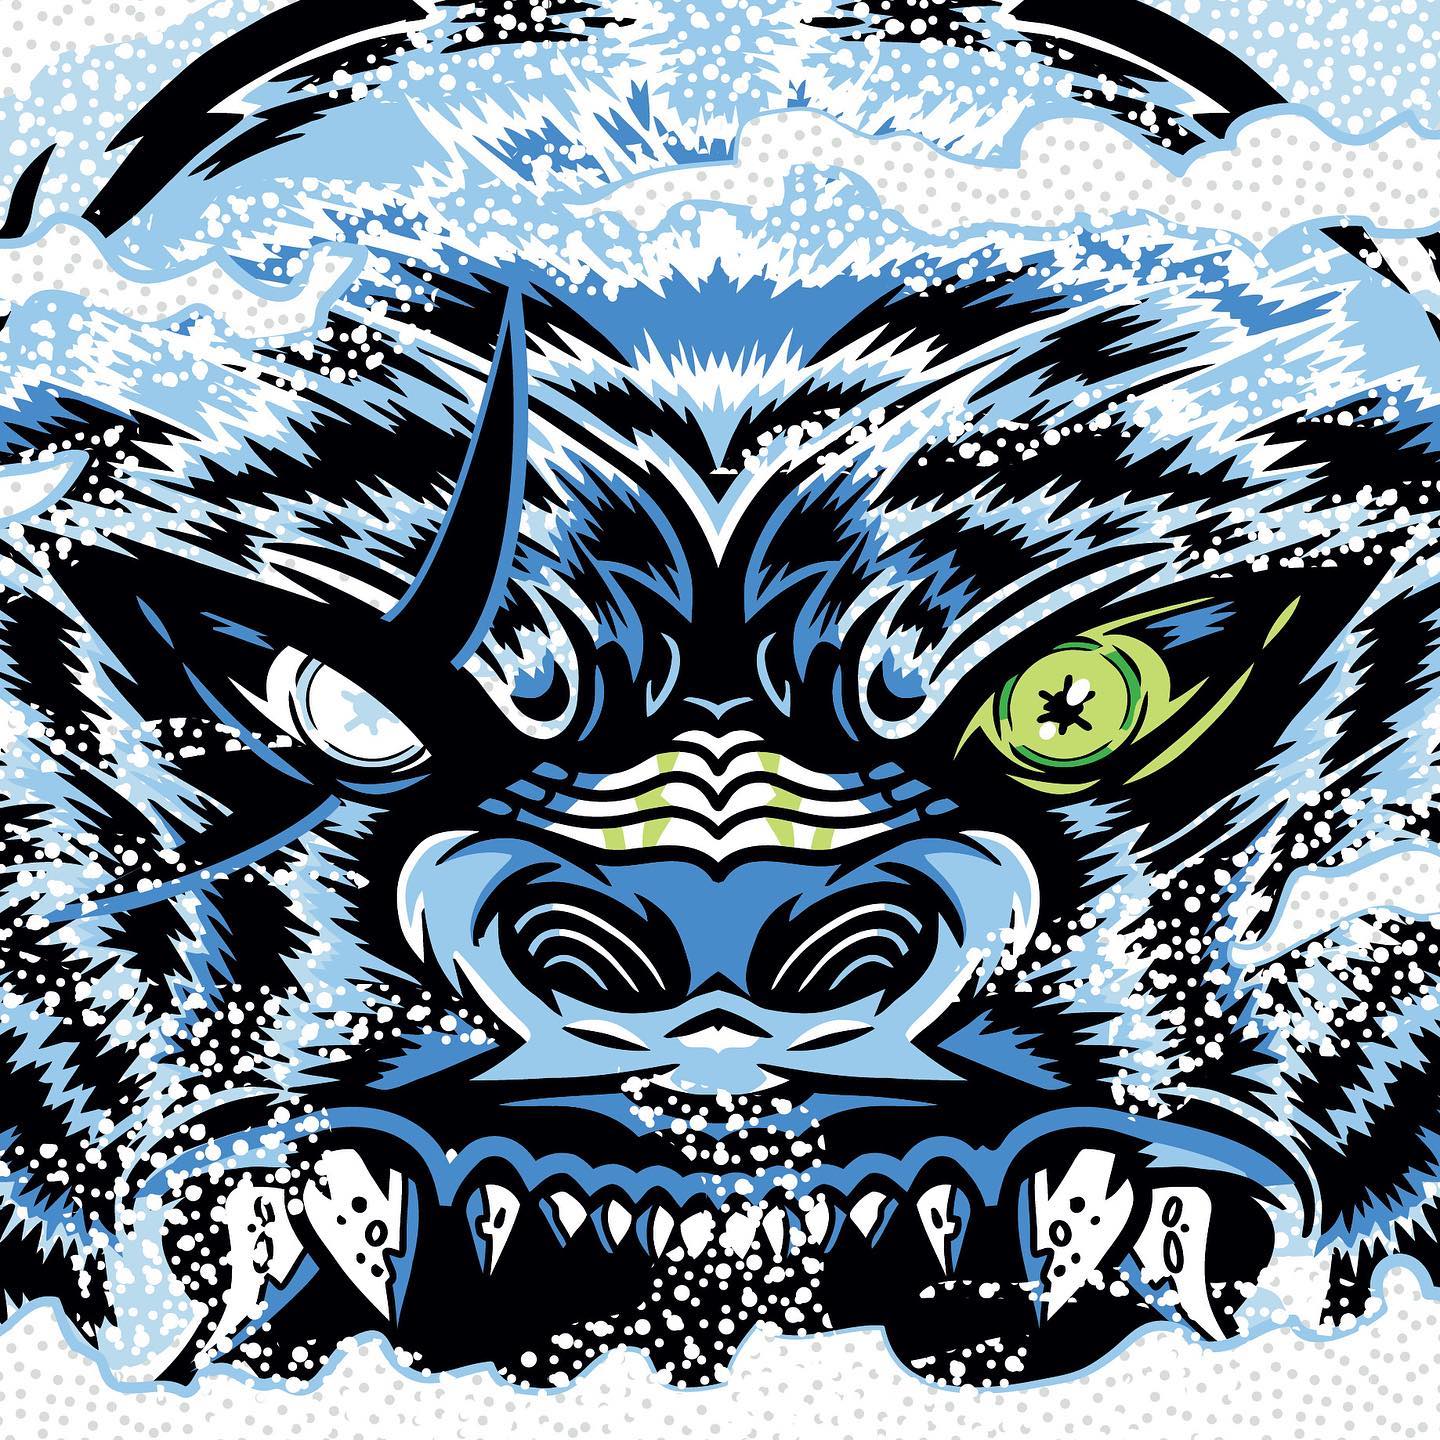 Graphic for an upcoming beer at Garage Band.  Looks like a the face of an angry blue dog.